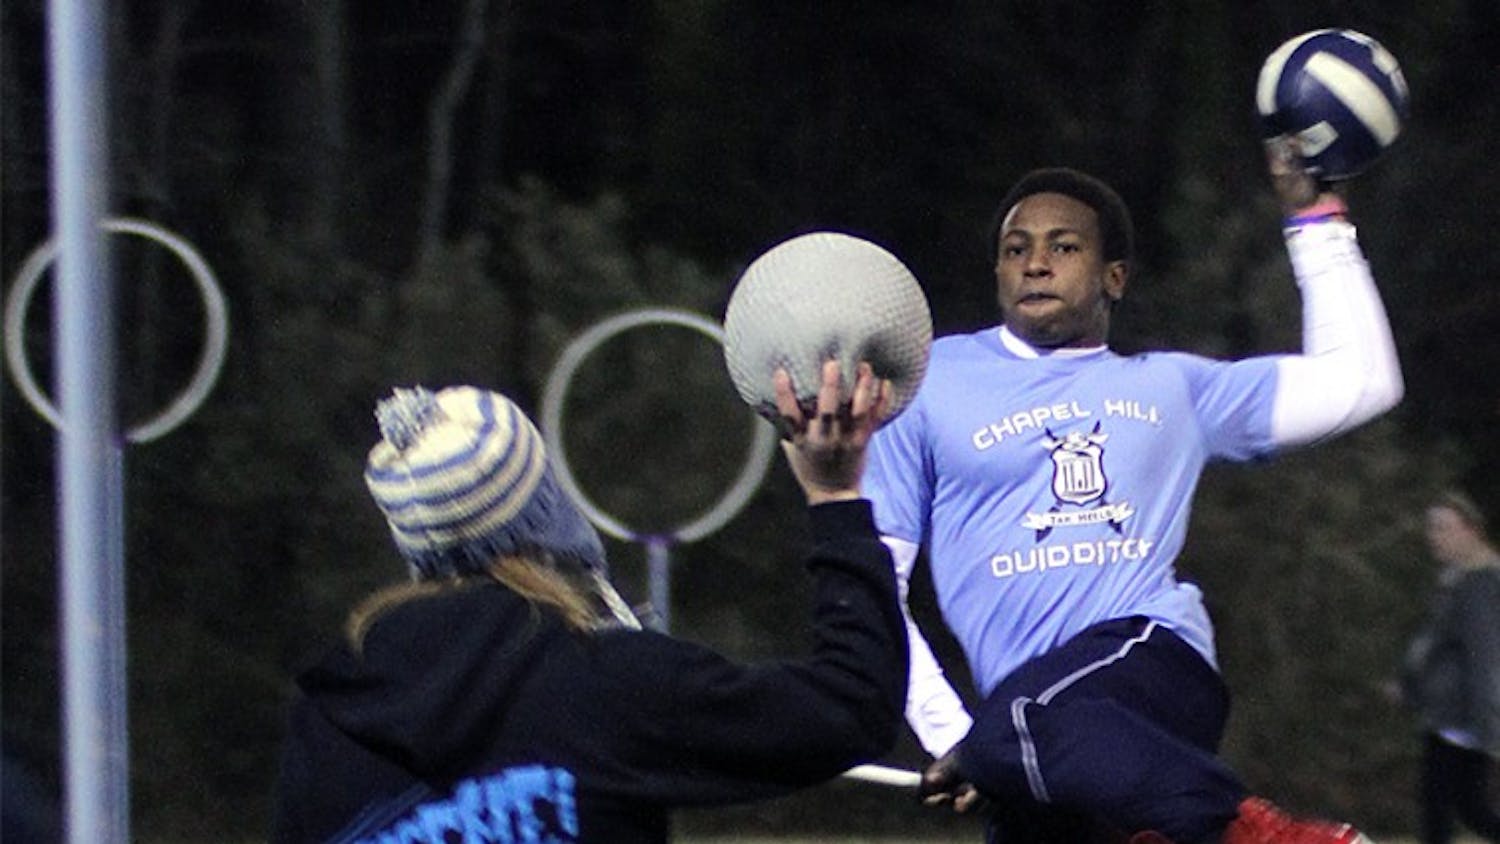 Lee Hodge jumps before attempting to score while Jessica McAfee defends during a Wednesday night quidditch practice.